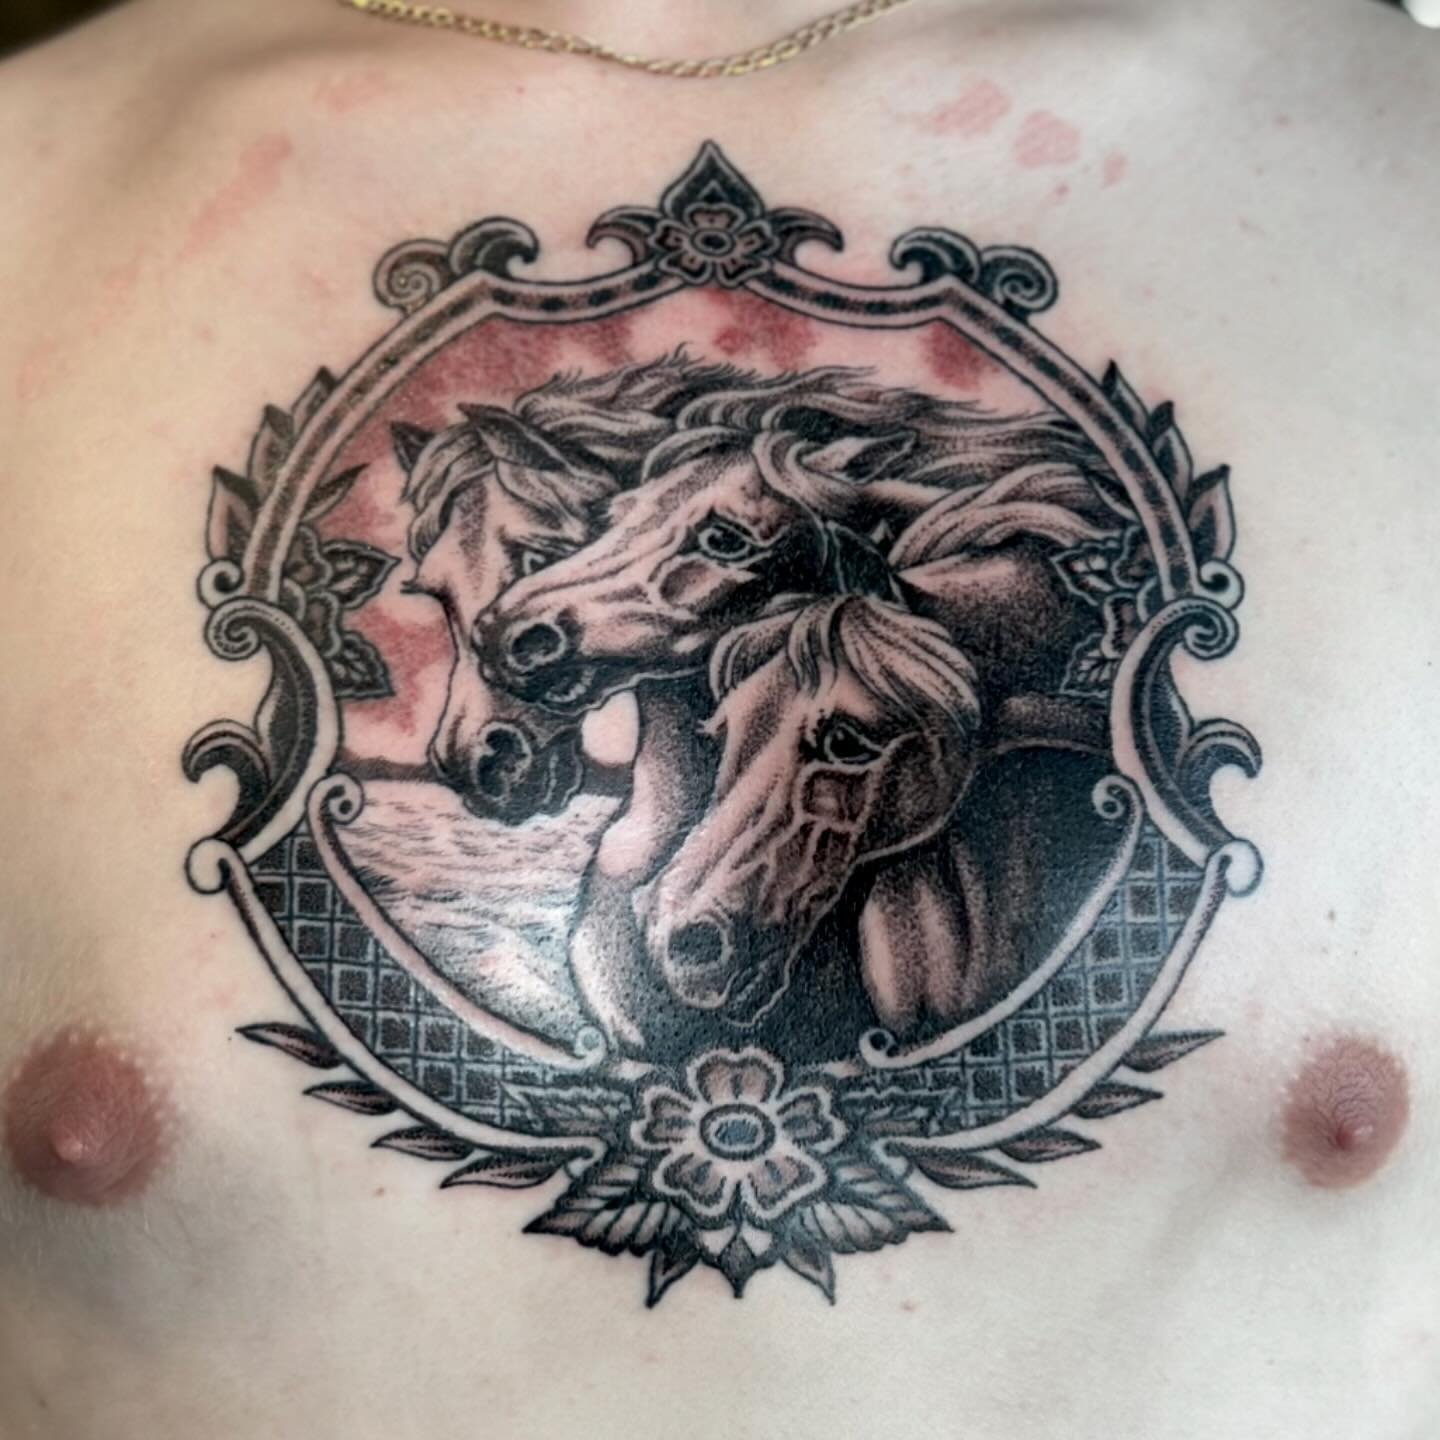 Big thanks to 
Winchester&rsquo;s very own Cowboy 
for getting this version of the much loved 
&lsquo;Pharoah&rsquo;s Horses&rsquo; from my book 
&lsquo;The Language of Tattoos&rsquo;

#olivermunden #mundenbrothers #rocksteadytattoo #worthingtattoo #